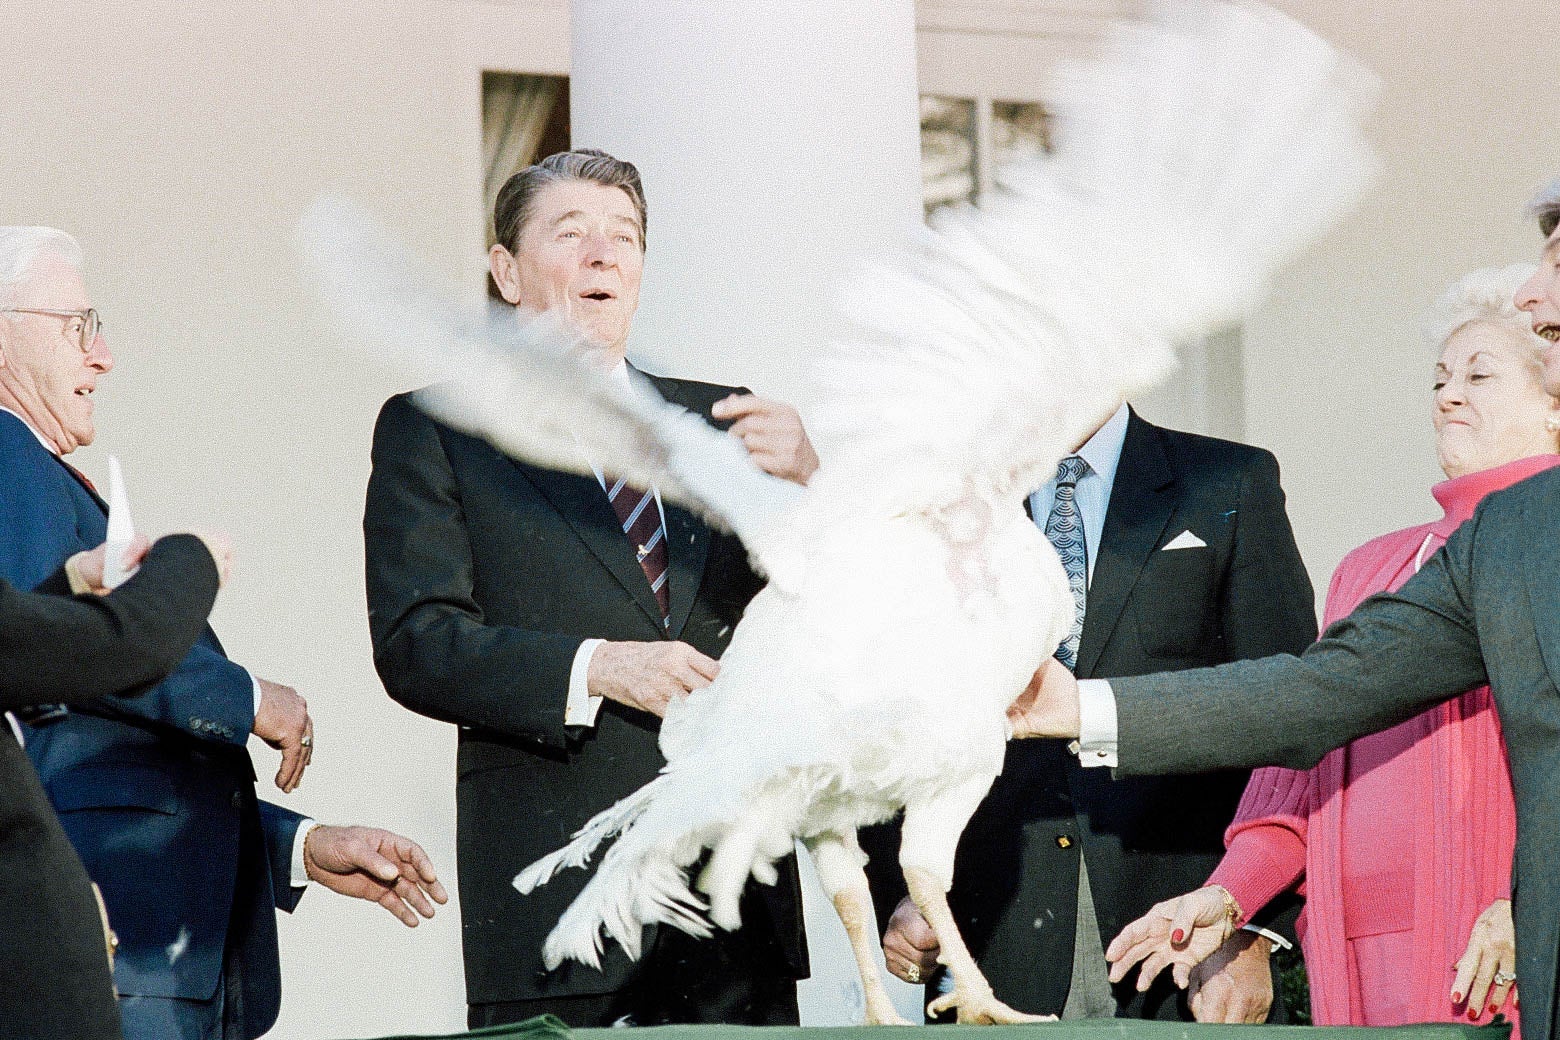 Ronald Reagan looks surprised as a turkey in front of him spreads its wings and tries to take off.